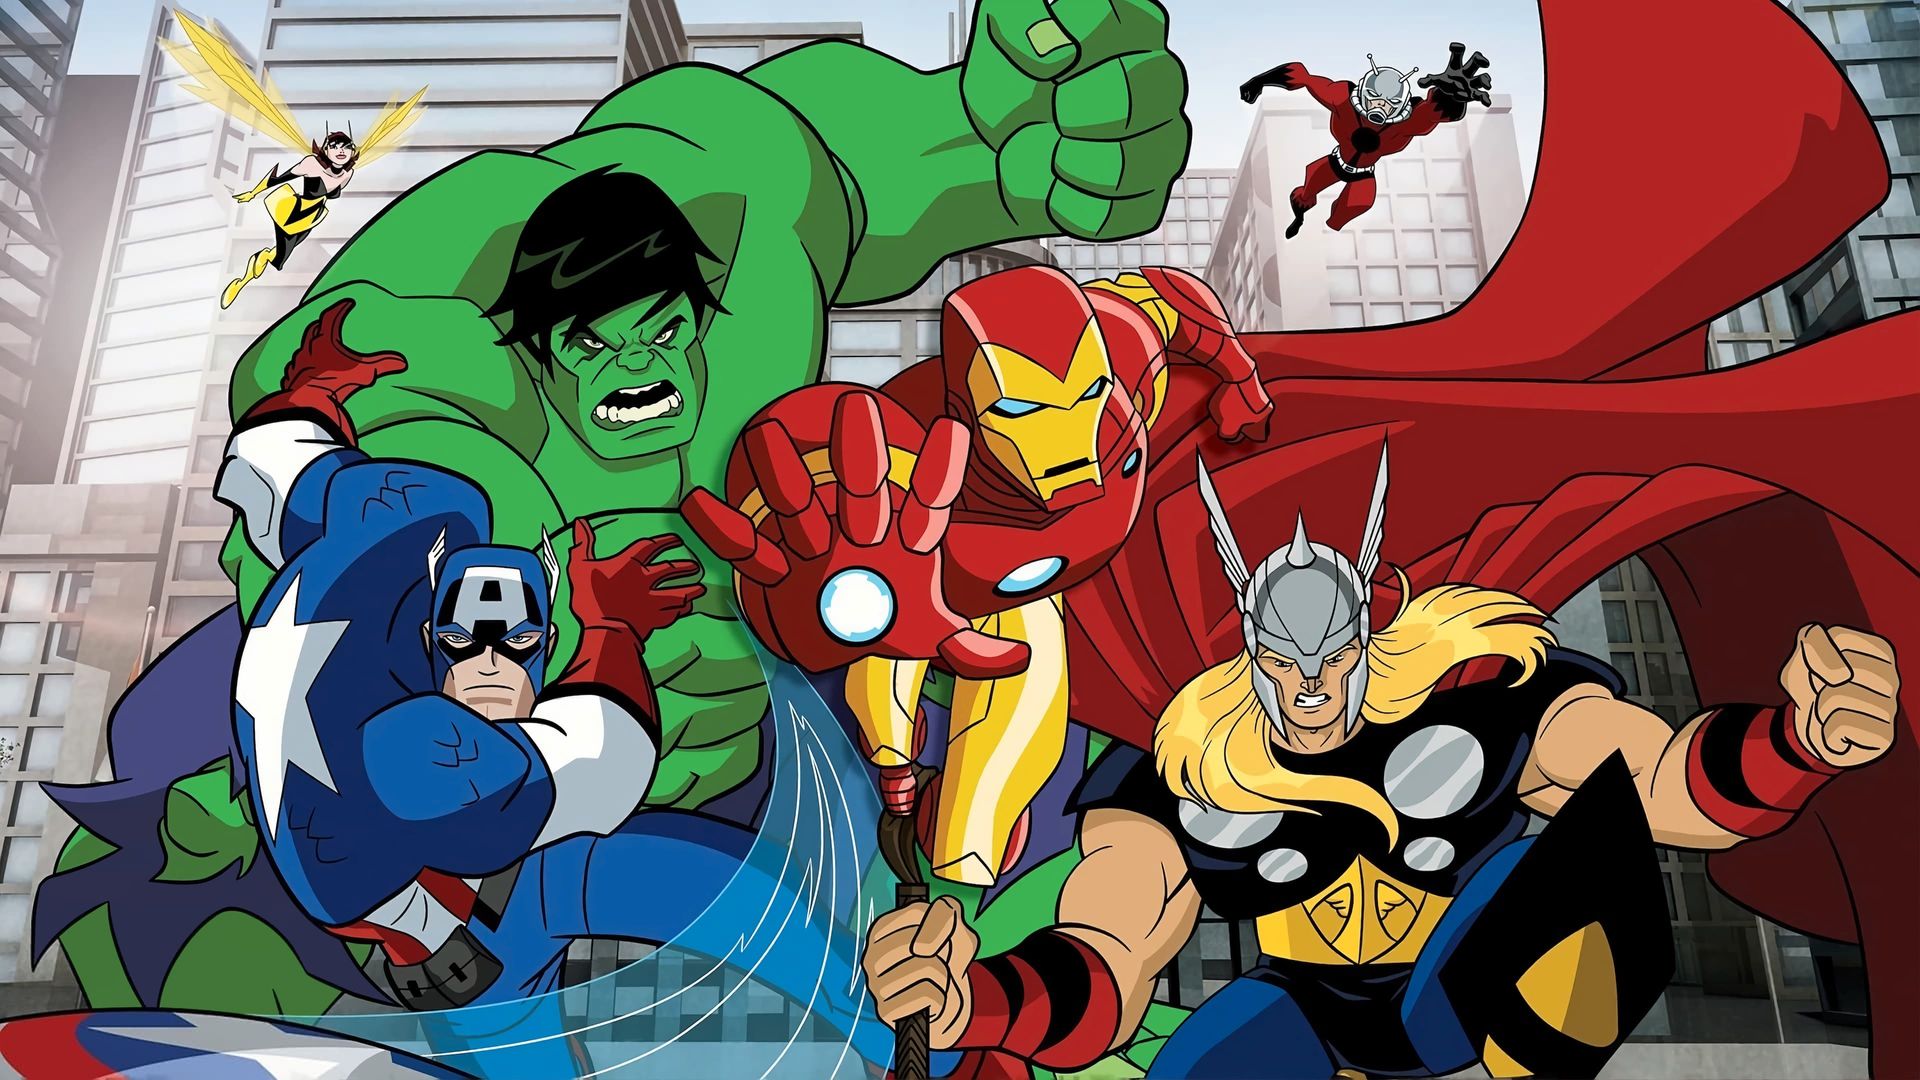 The Avengers: Earth's Mightiest Heroes background